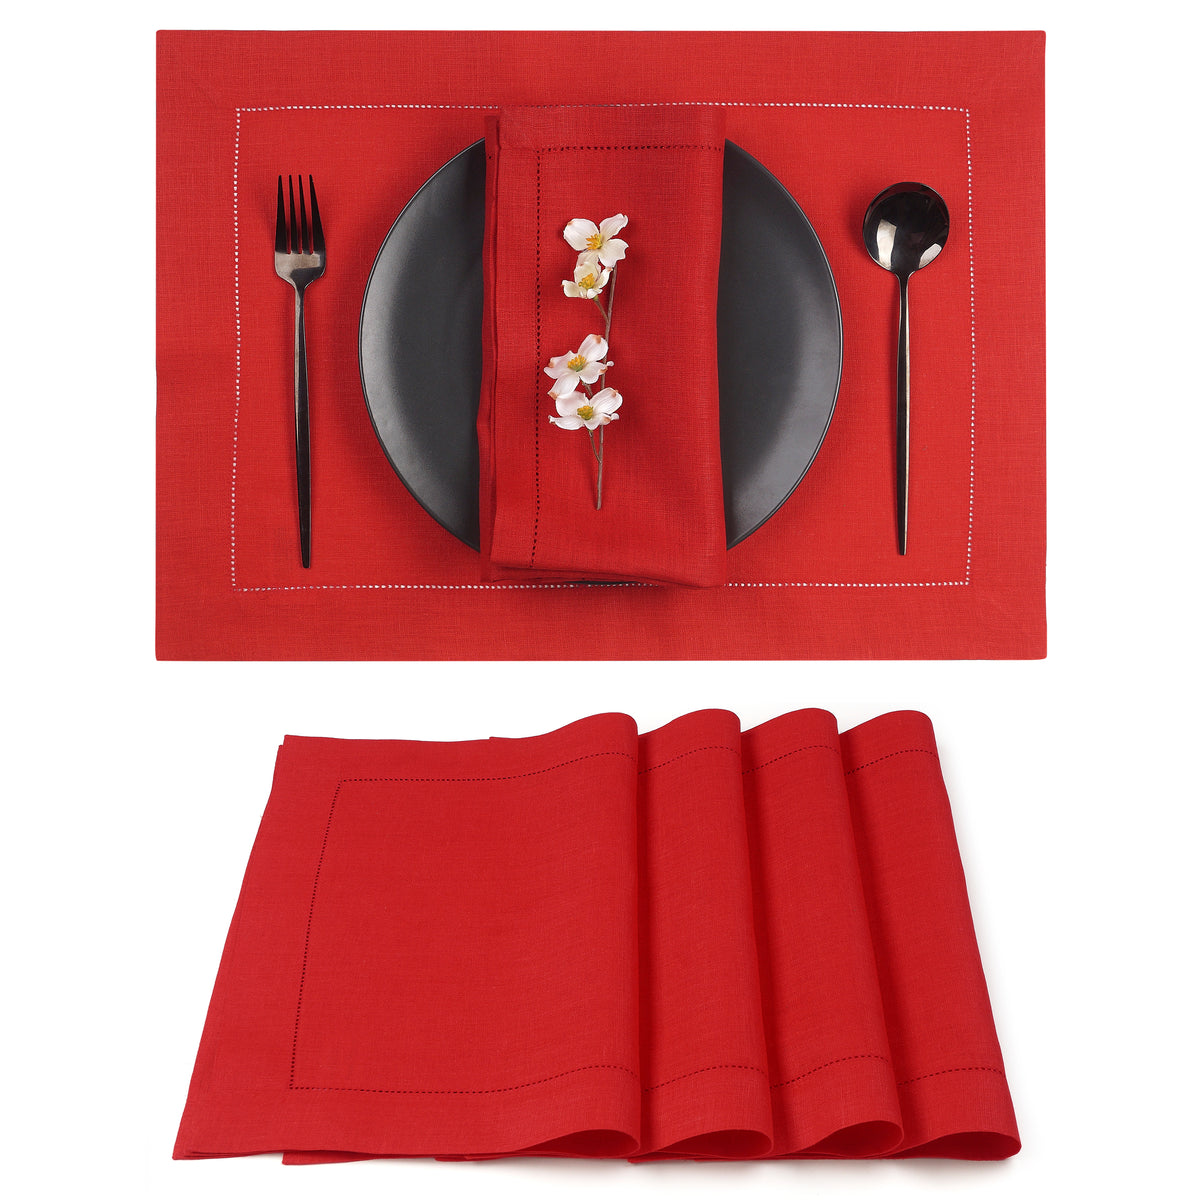 Bright Red Linen Placemats 14 x 19 Inch Set of 4 - Hemstitch